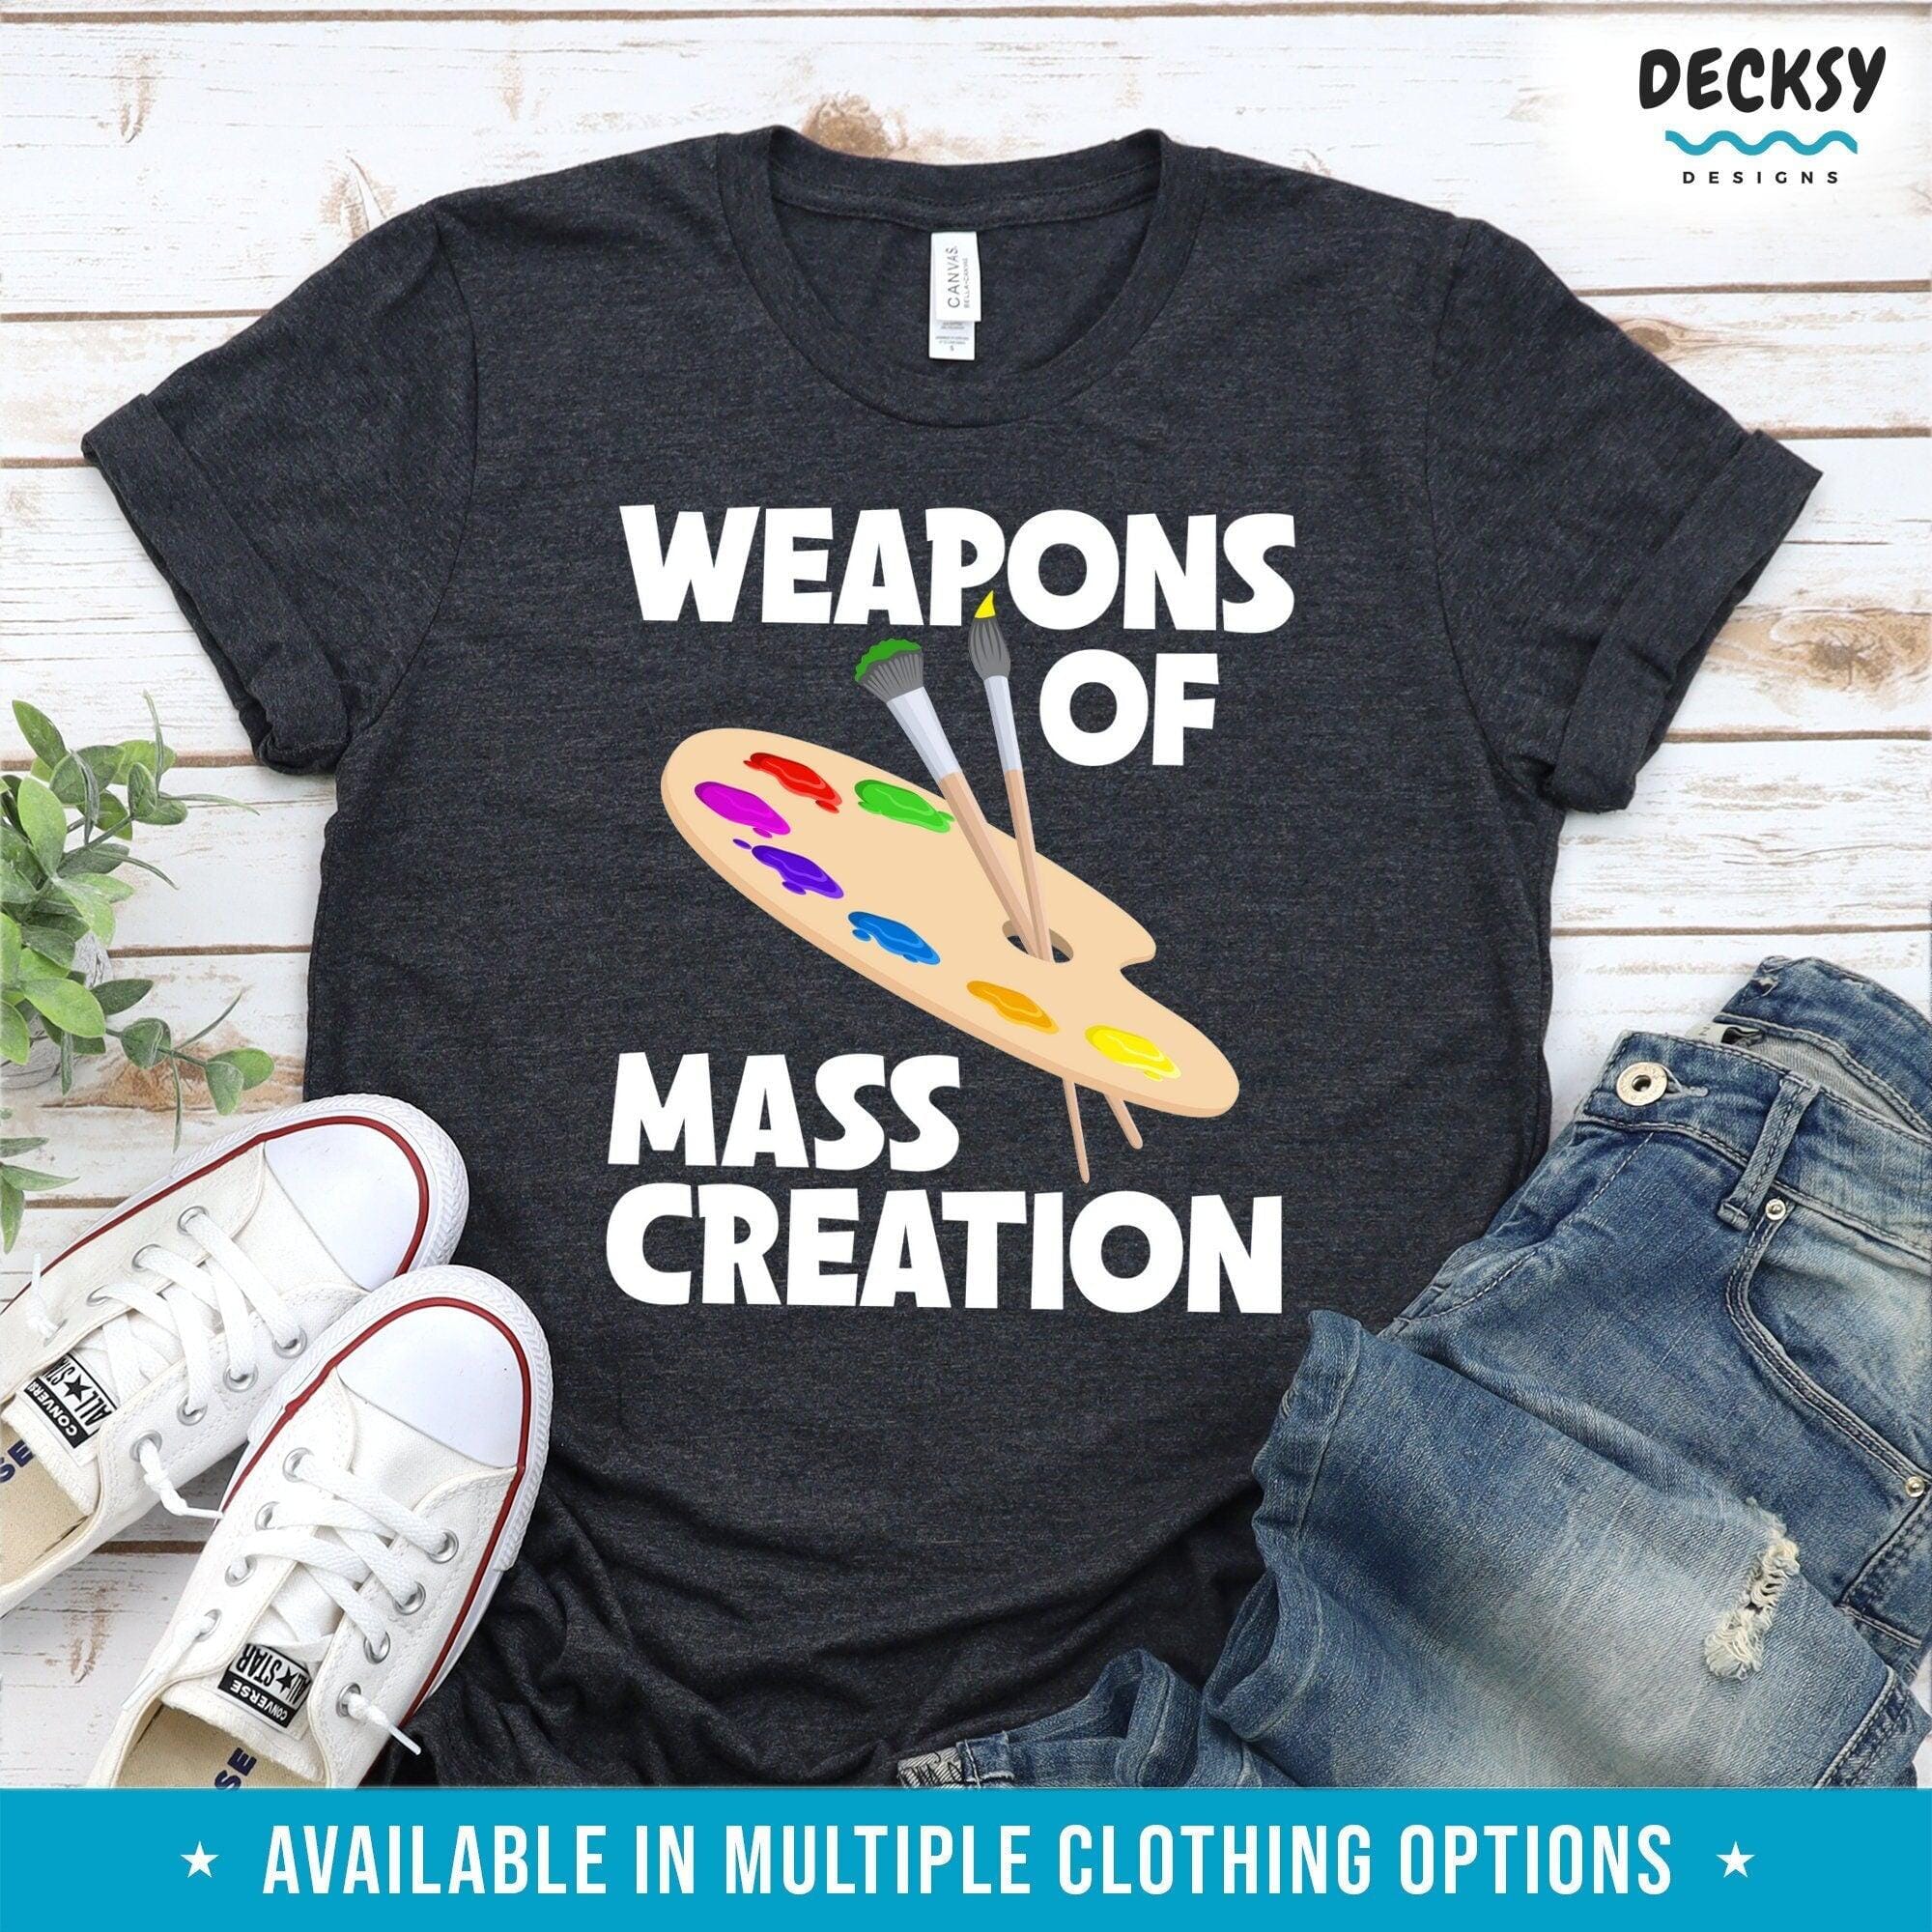 Artist Shirt, Gift For Painter-Clothing:Gender-Neutral Adult Clothing:Tops & Tees:T-shirts:Graphic Tees-DecksyDesigns